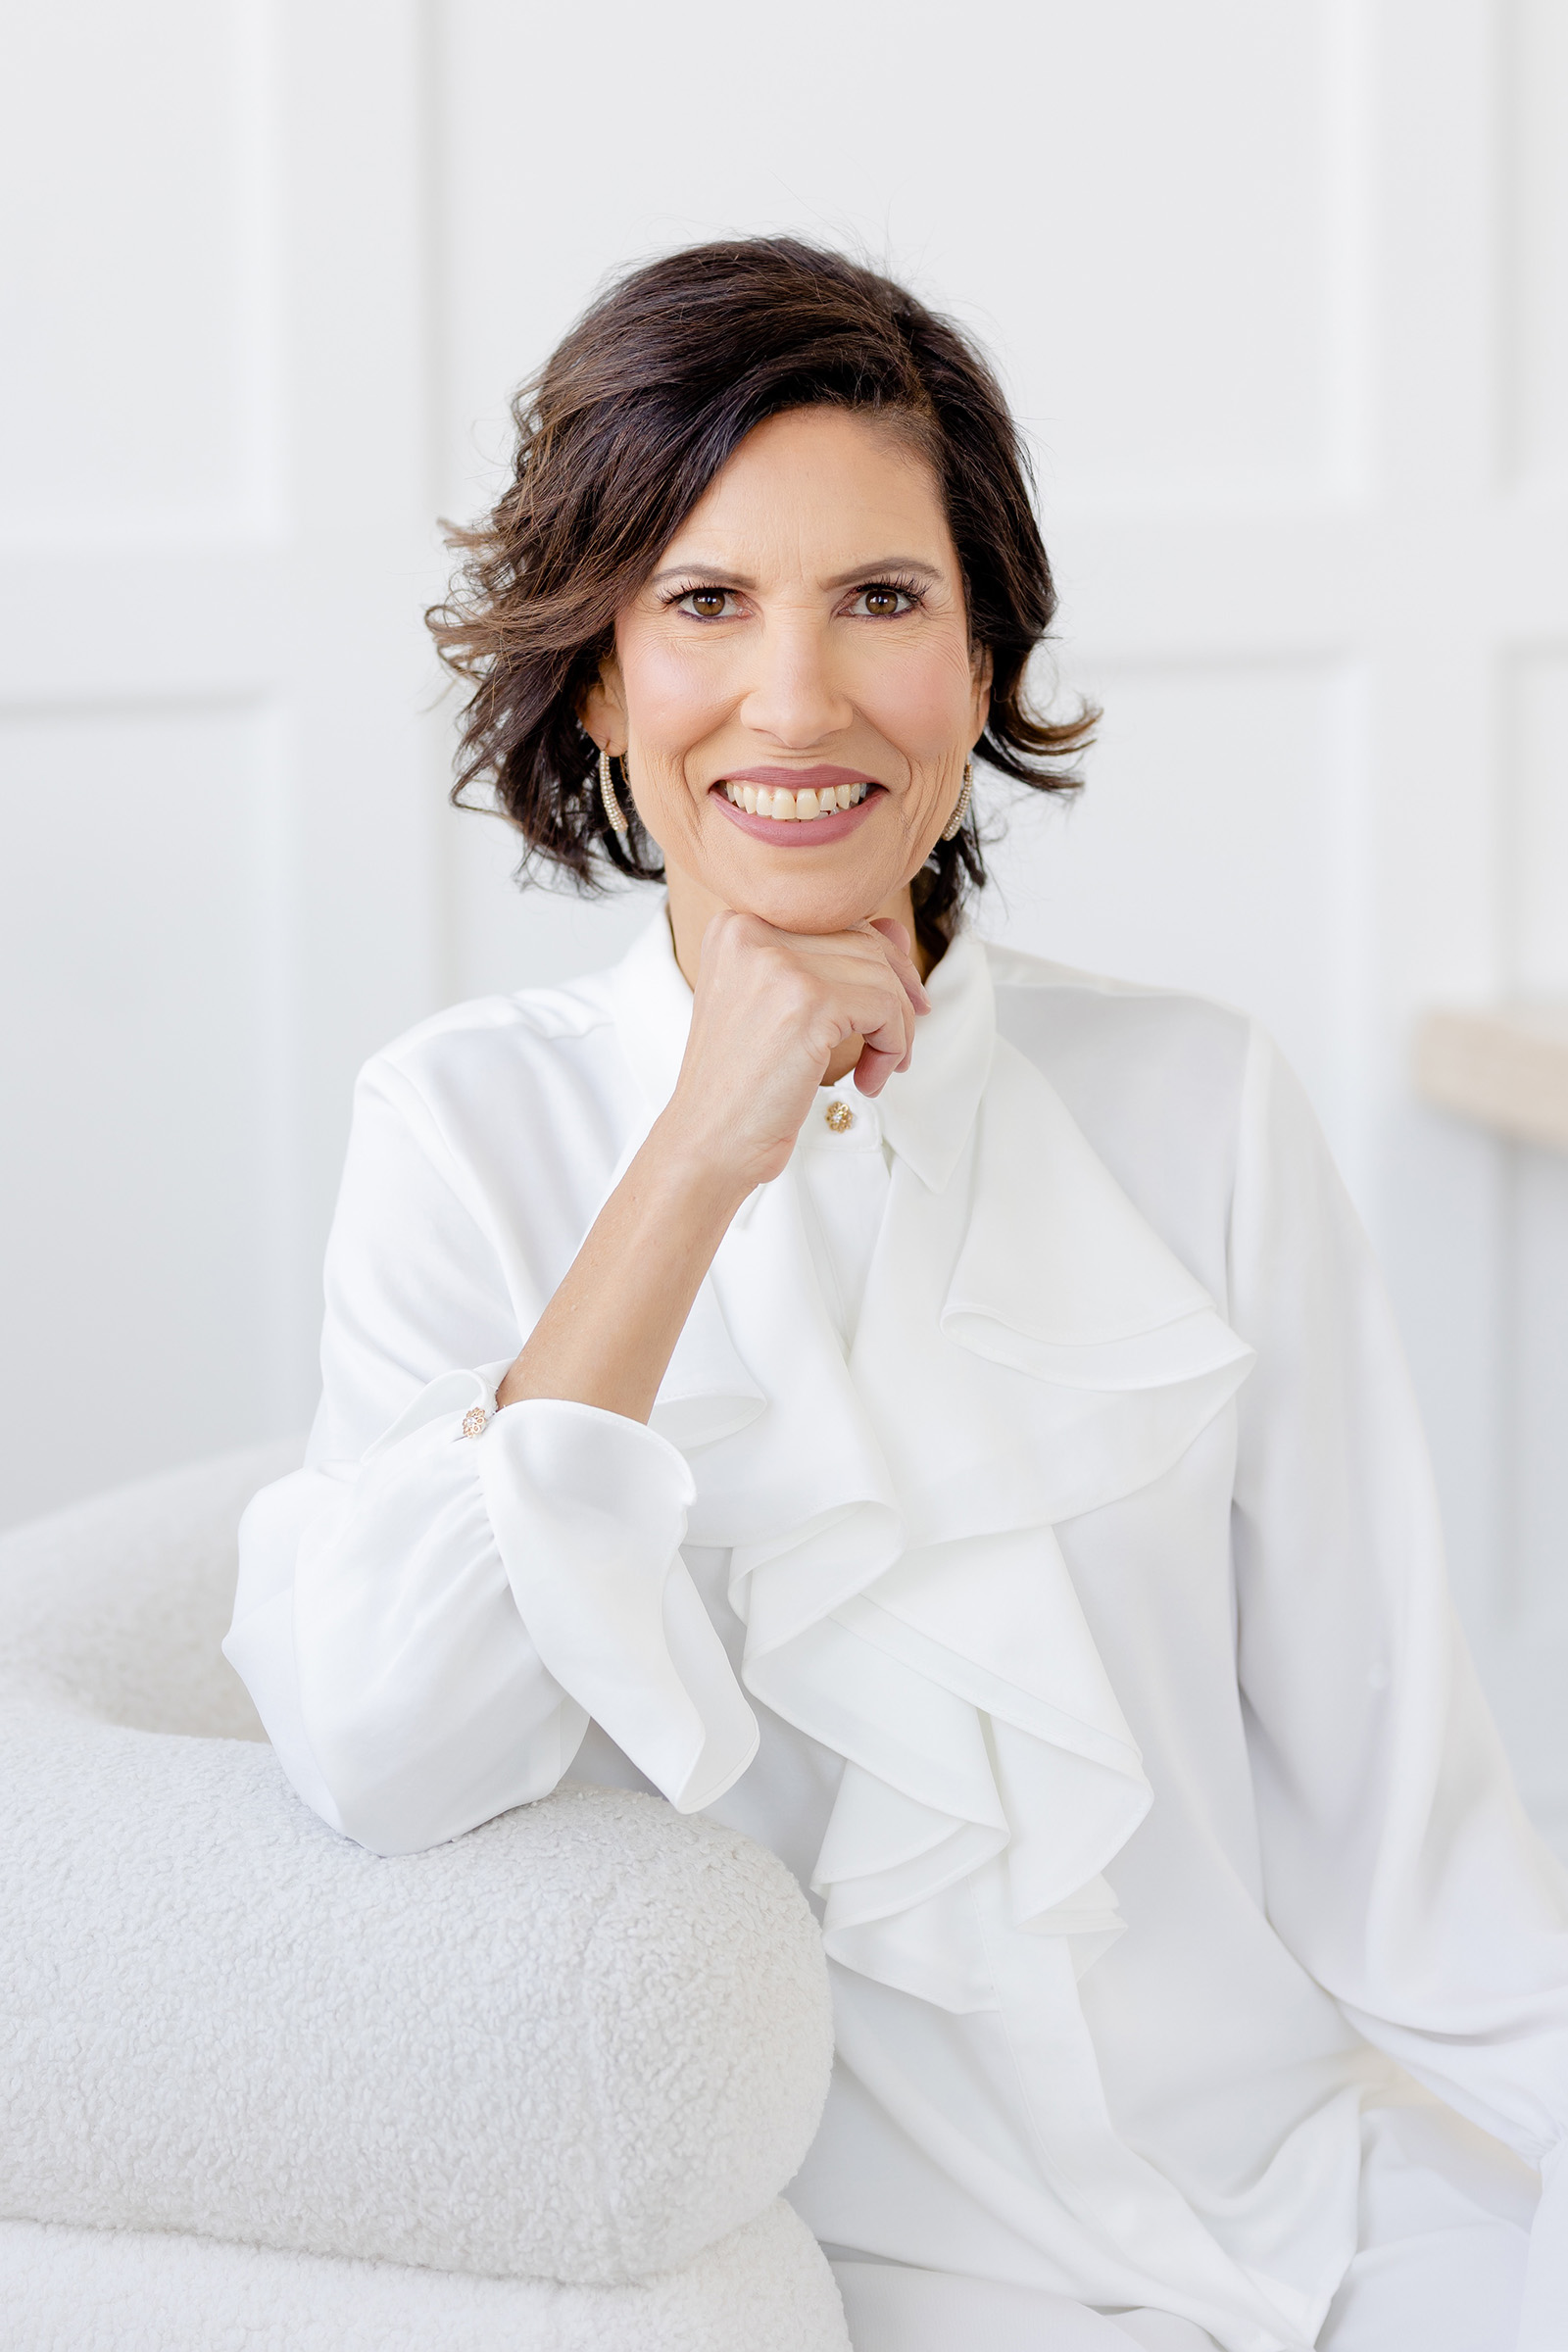 Event photography of a woman in a white shirt elegantly seated on a white couch.